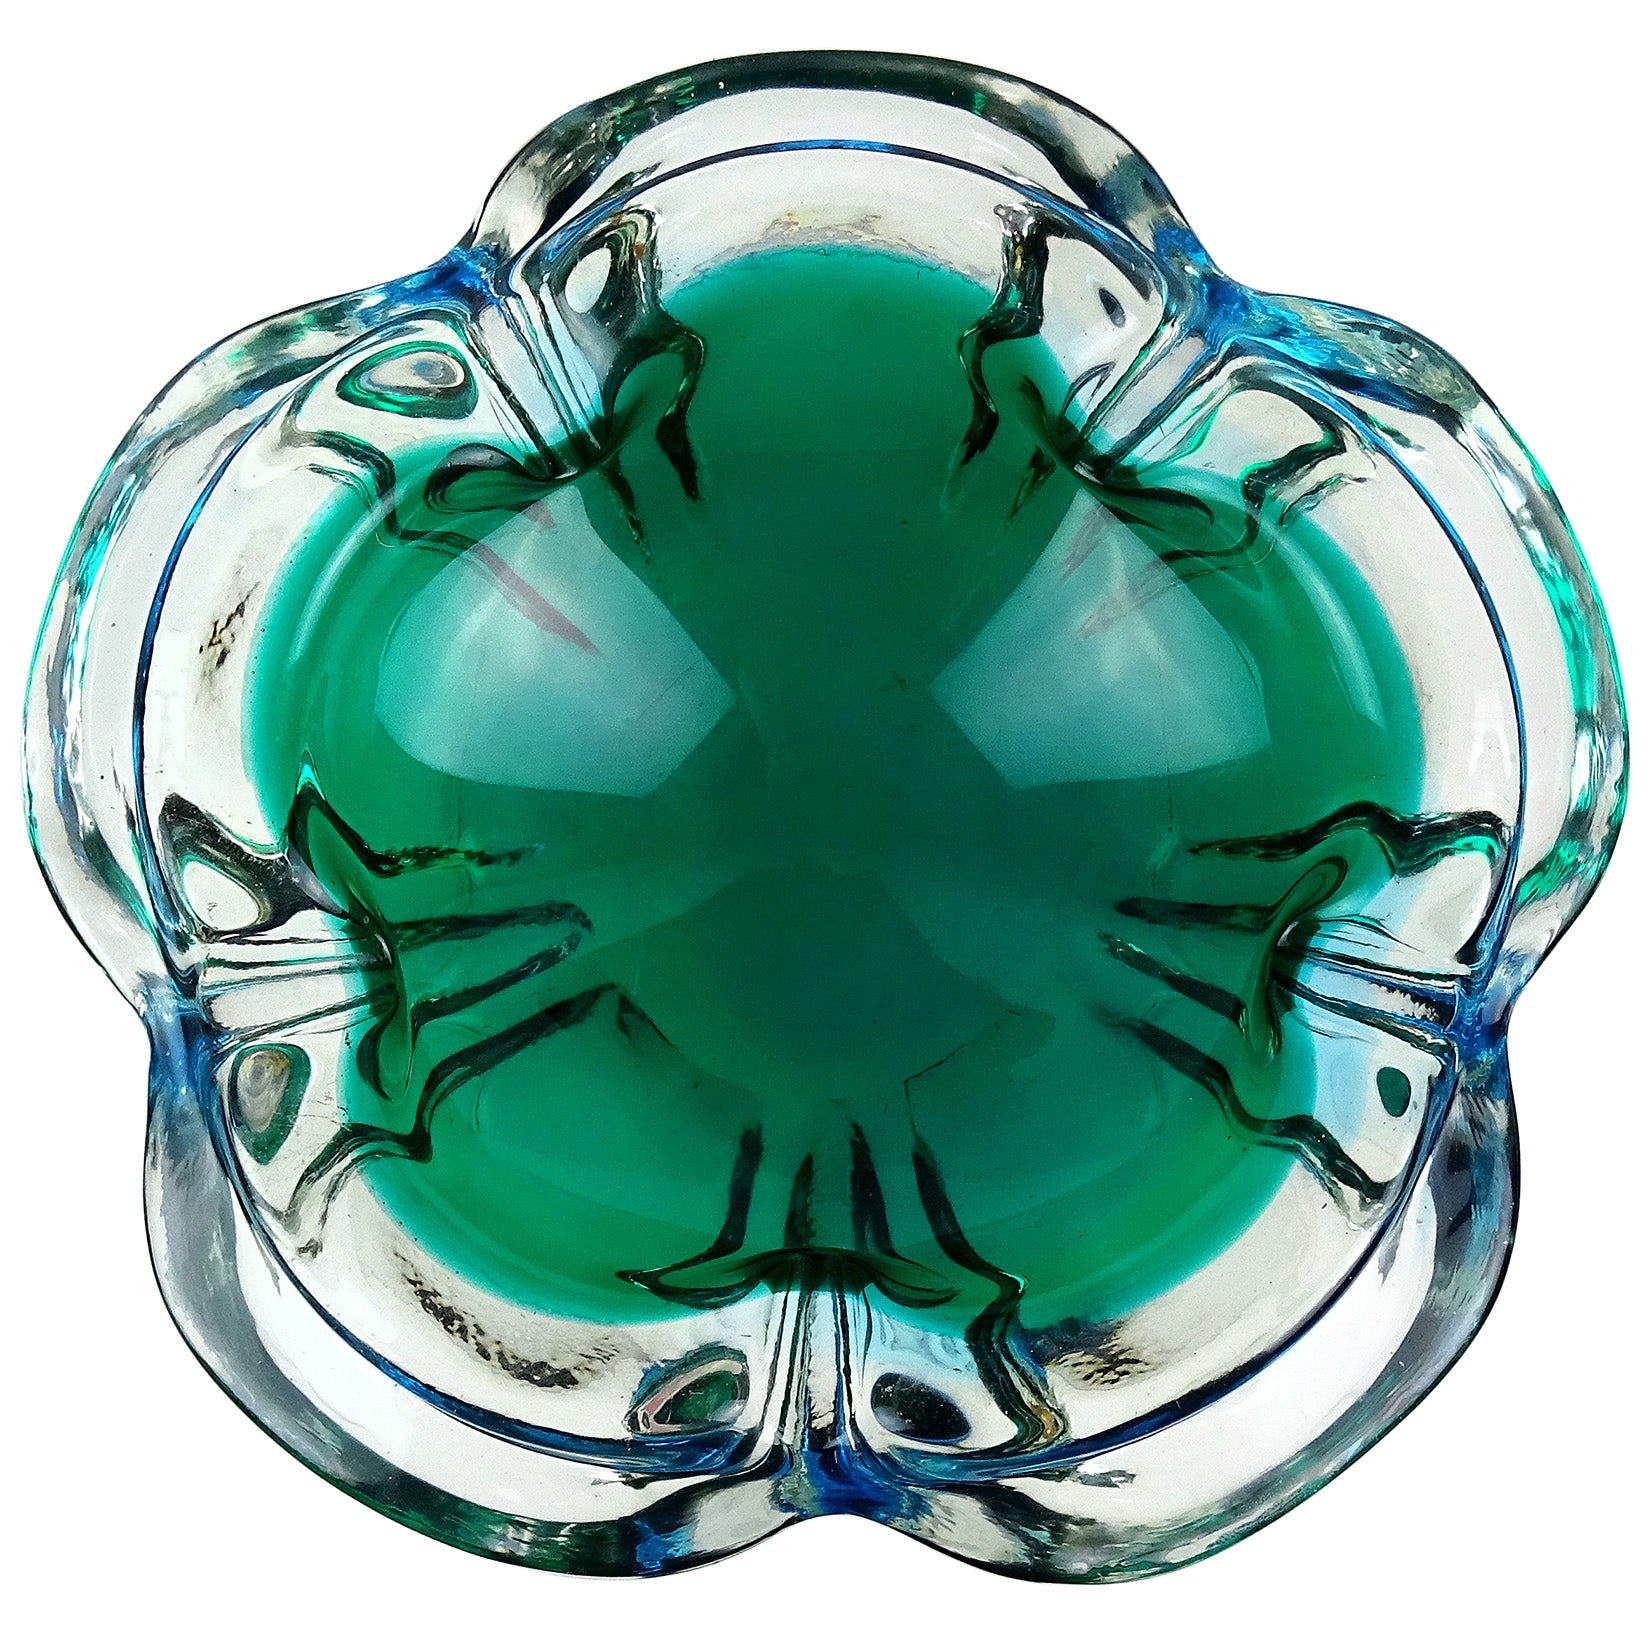 Beautiful vintage Murano hand blown Sommerso blue green Italian art glass flower shape bowl / ashtray. Created in the style of designer Alfredo Barbini, circa 1960-1970. The bowl has a double rim, one created by the outside petals, and another on